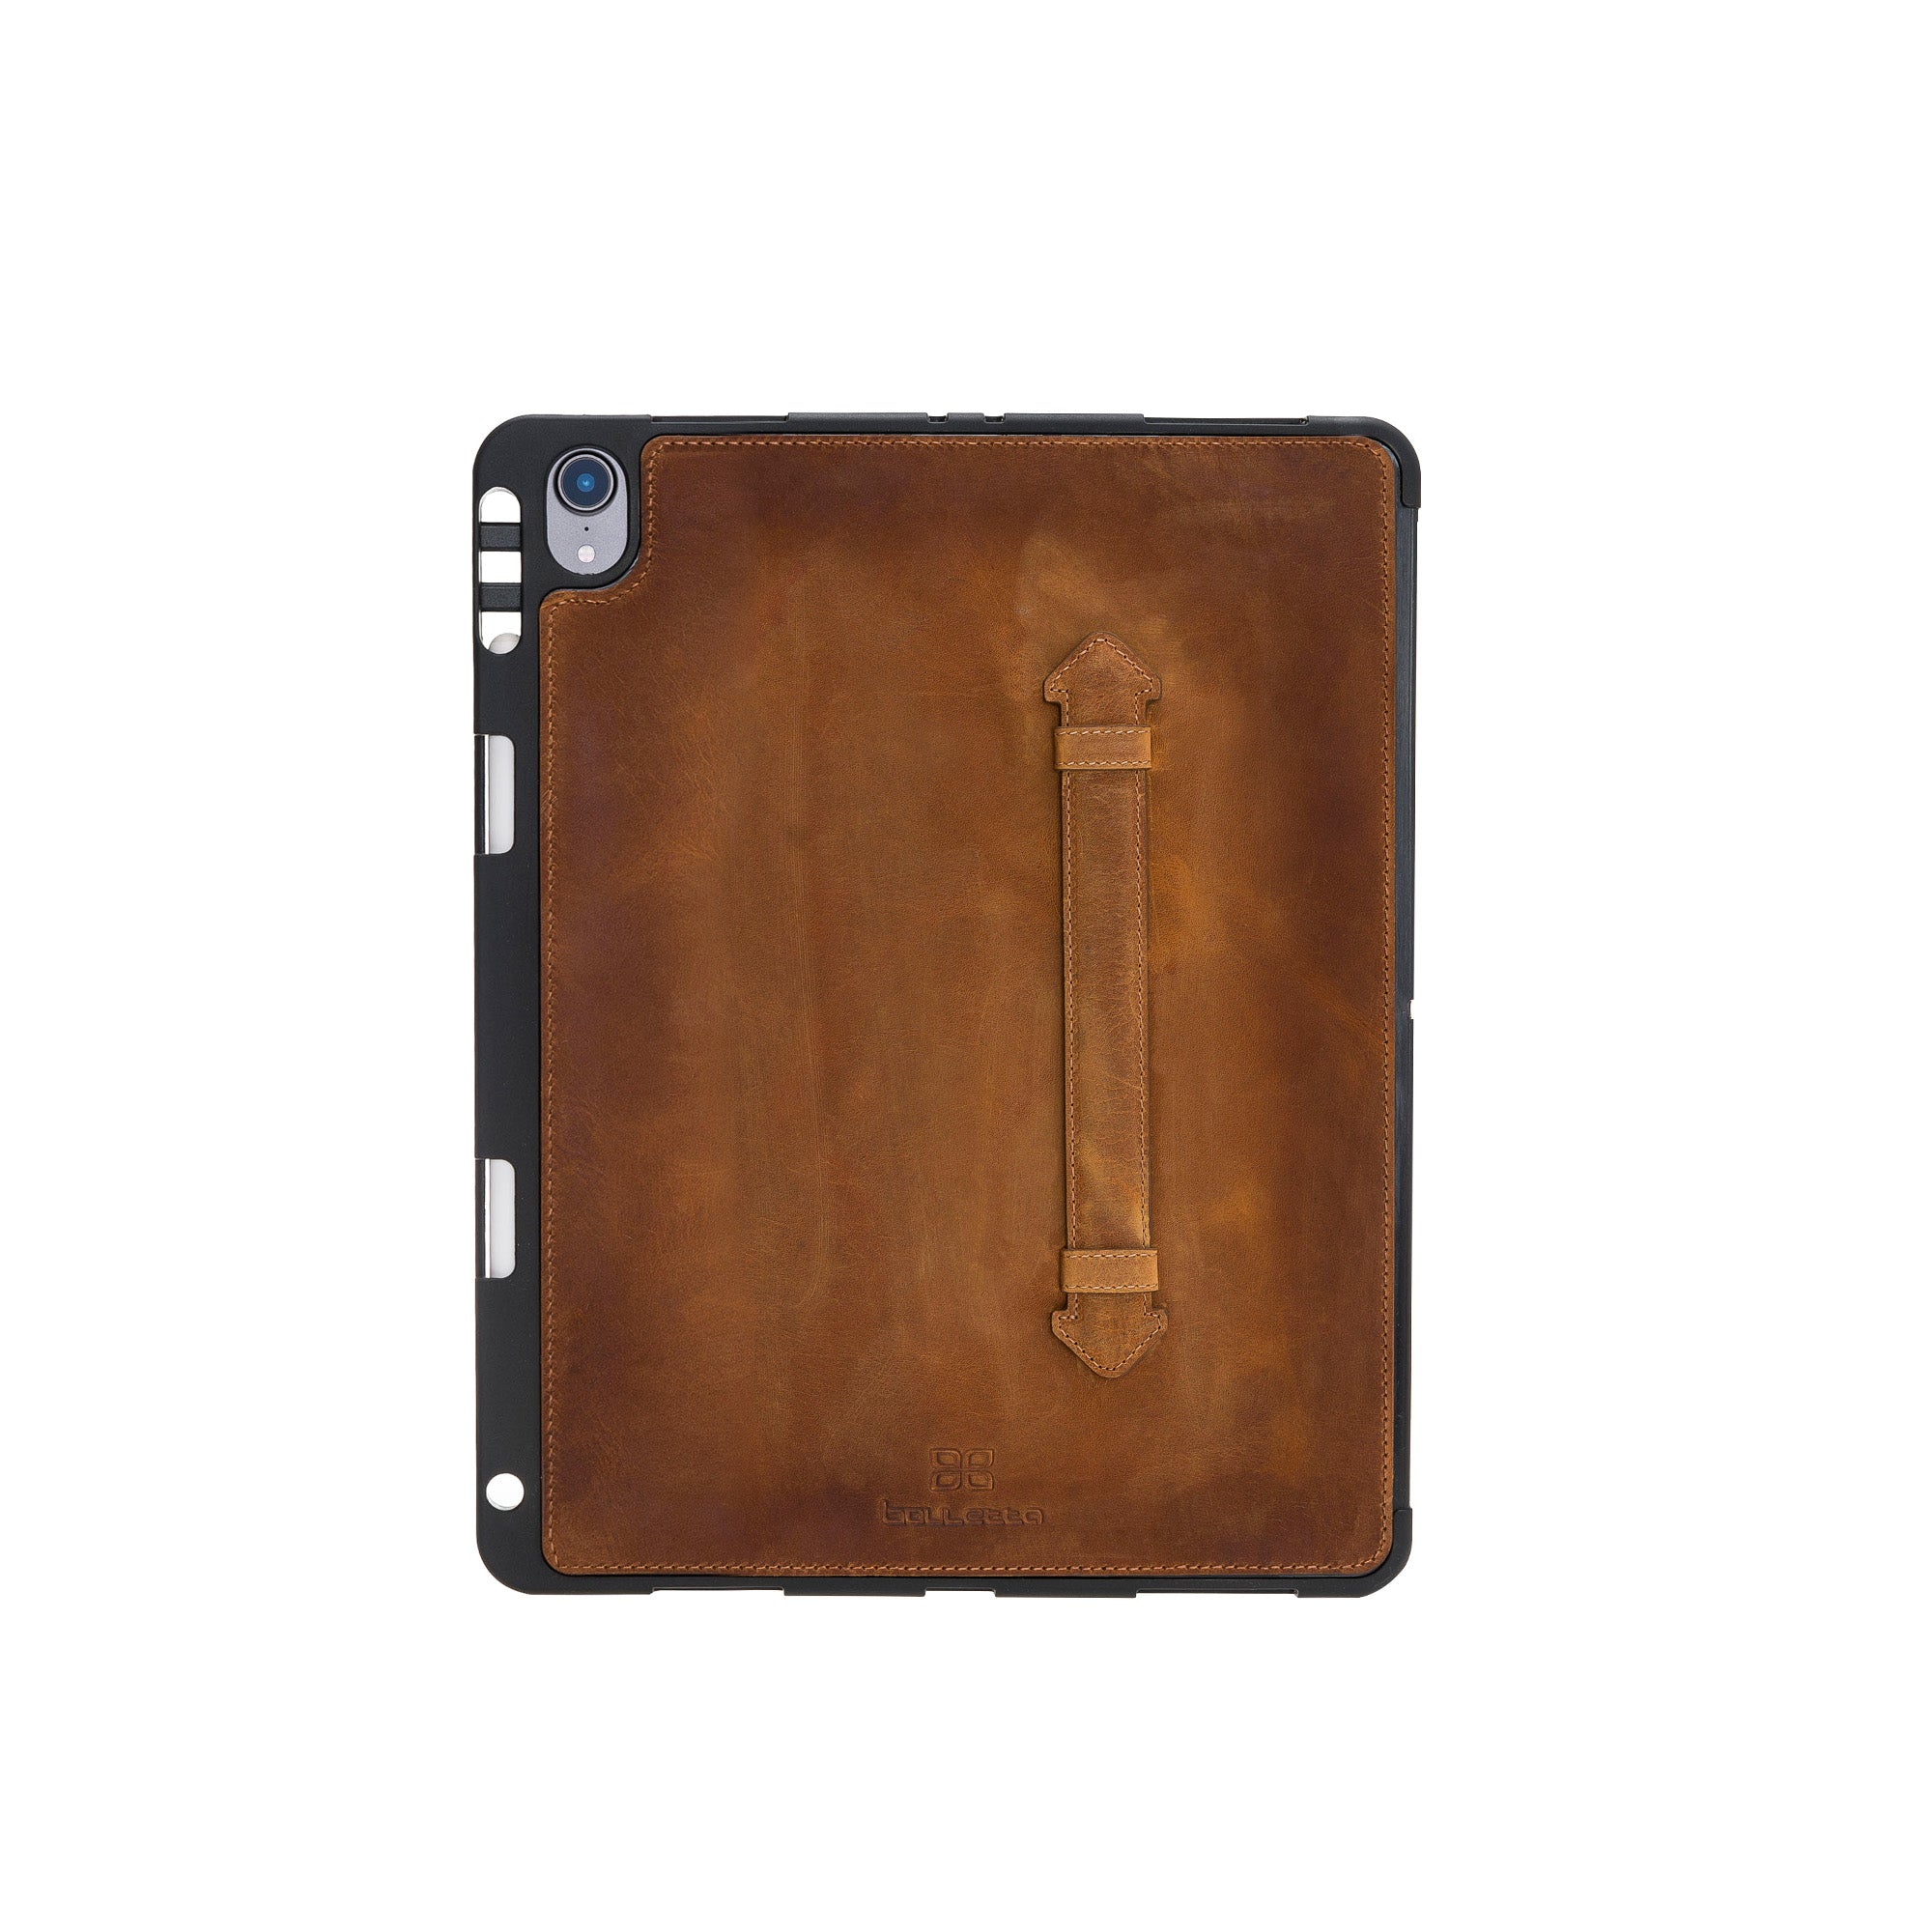 Felix Flex Cover Leather Back Case for iPad Pro 12.9" (2018) - TAN - saracleather